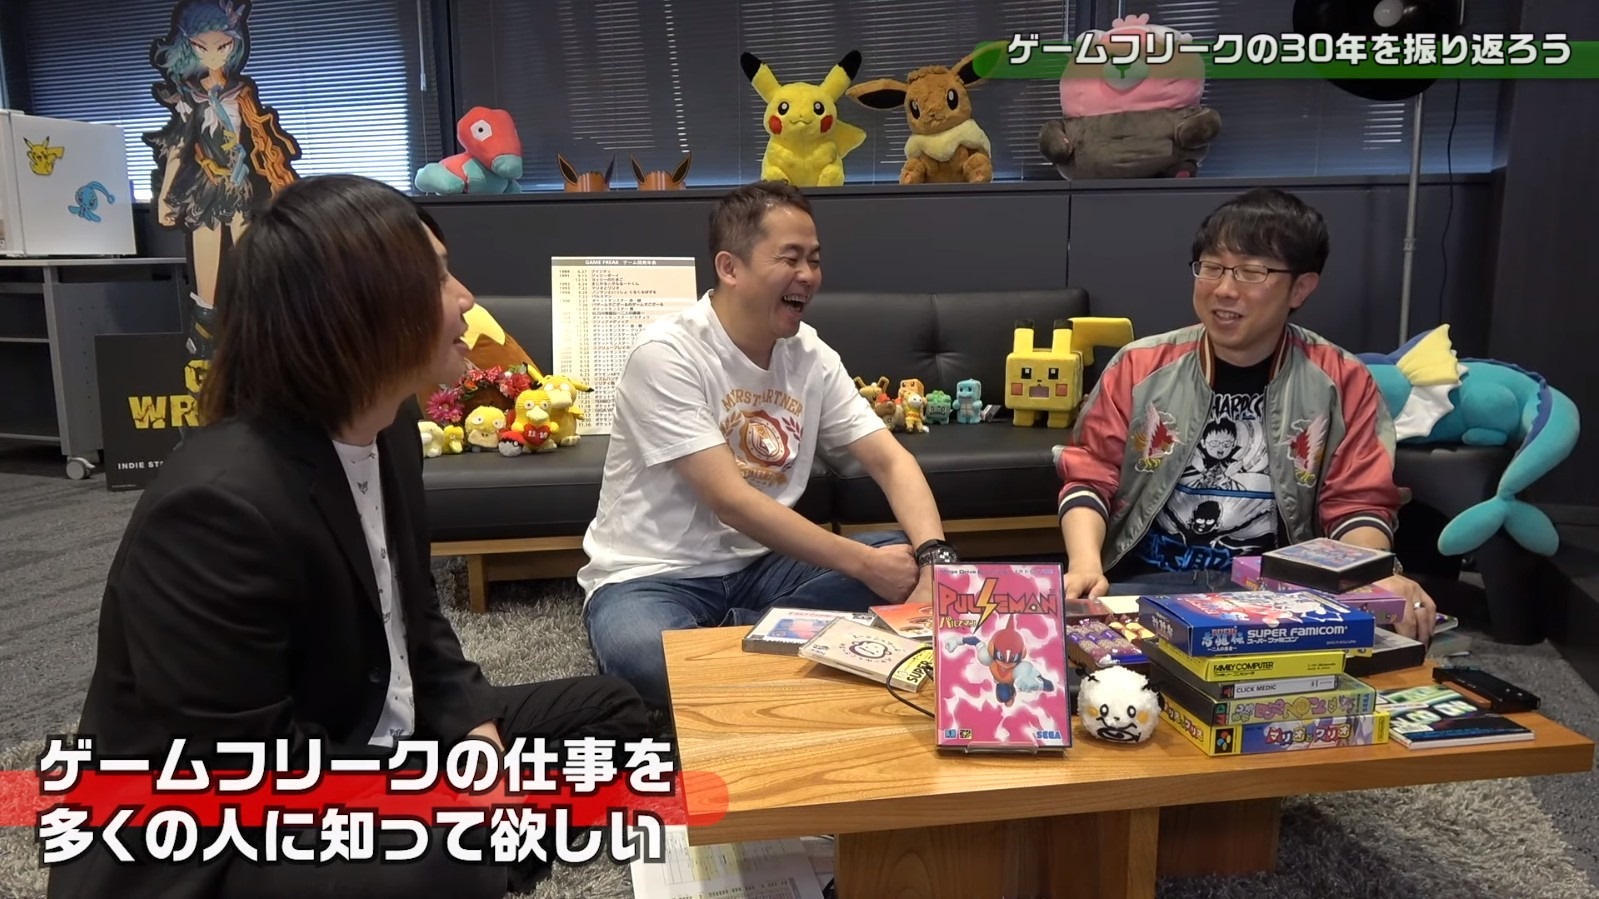 Junichi About People Commonly Mistaking Nintendo As Pokémon Makers -